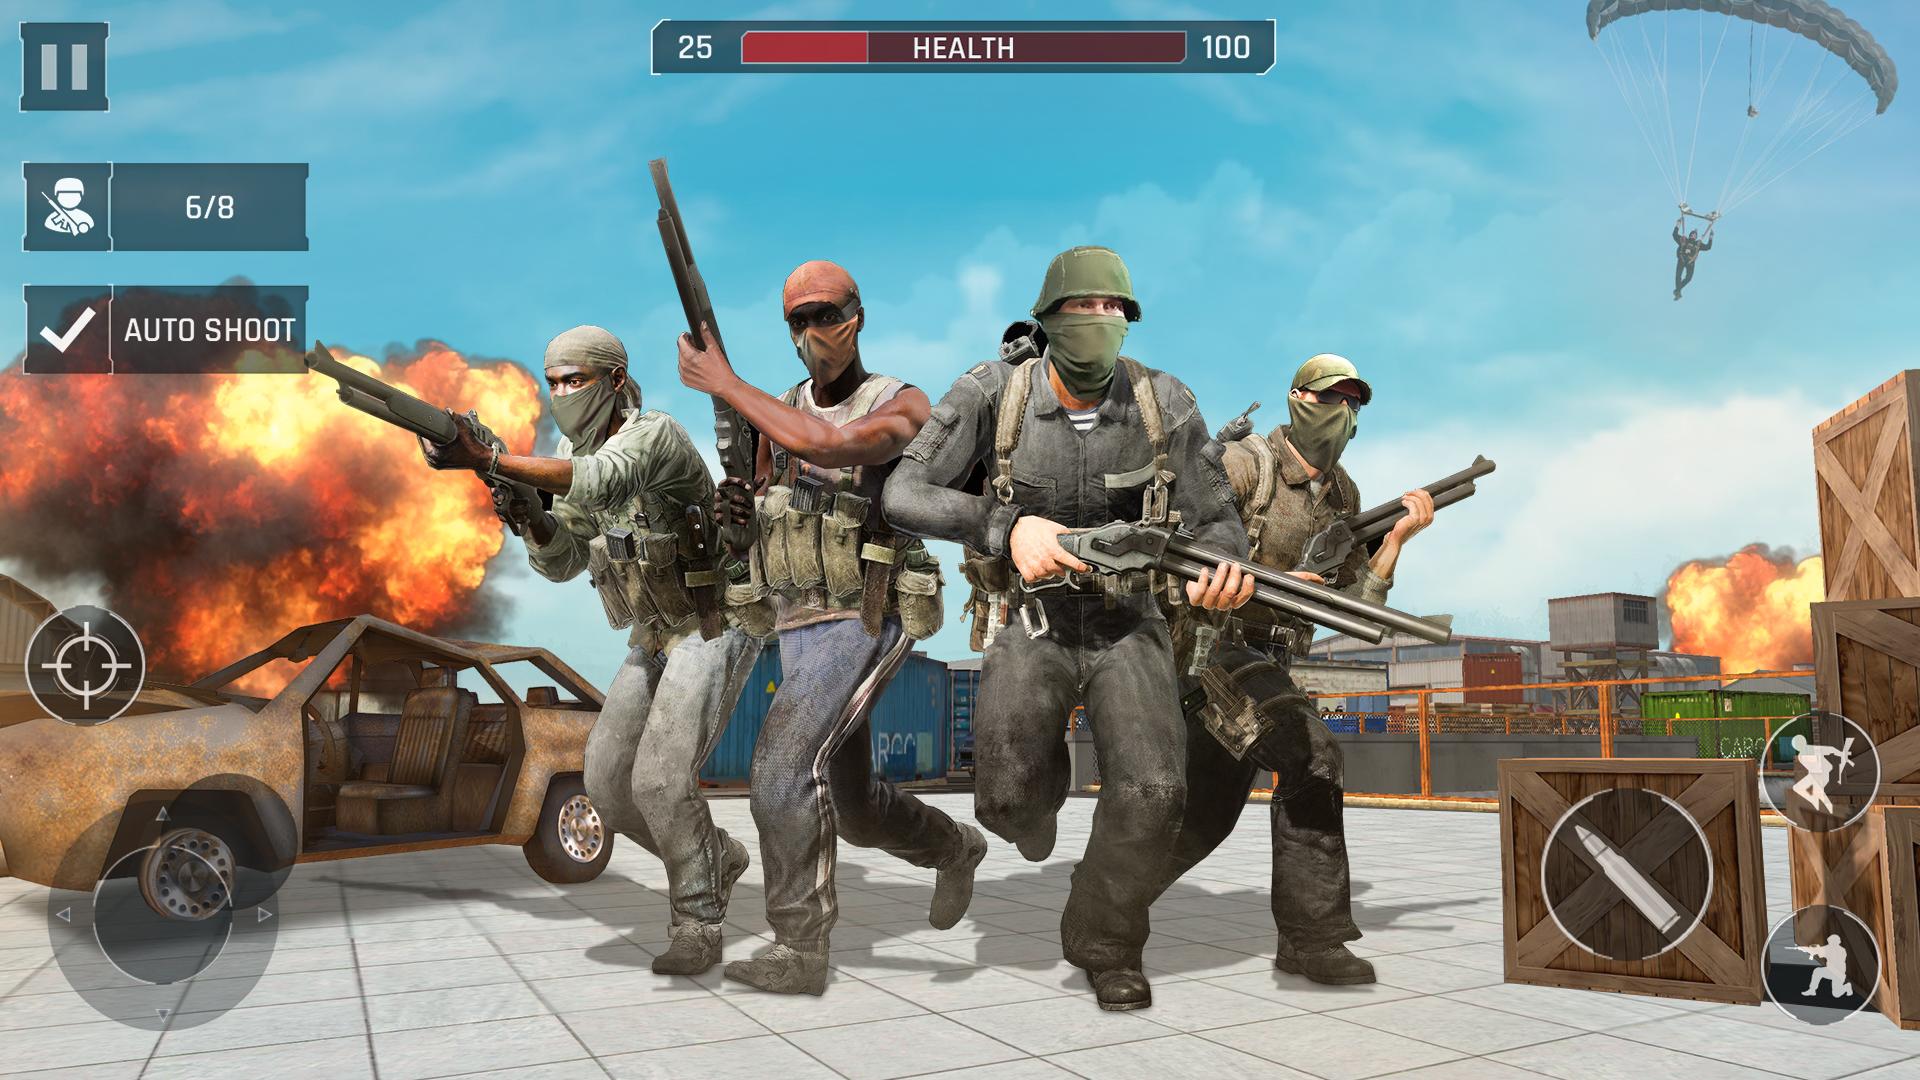 Play FPS Encounter Shooting Games Online for Free on PC & Mobile